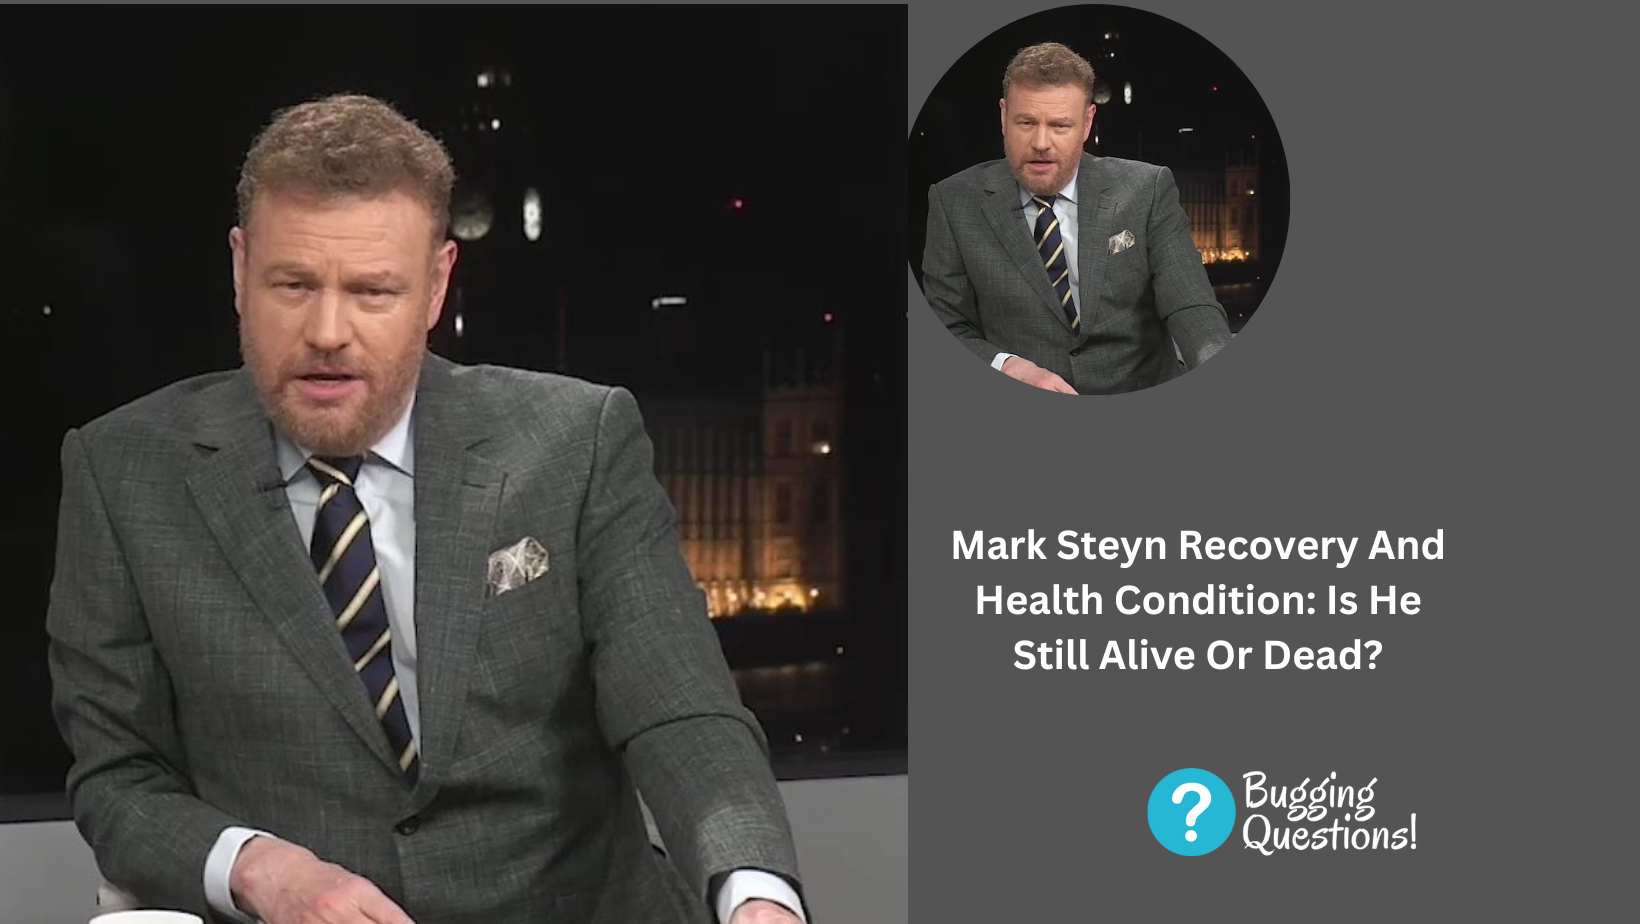 Mark Steyn Recovery And Health Condition: Is He Still Alive Or Dead?